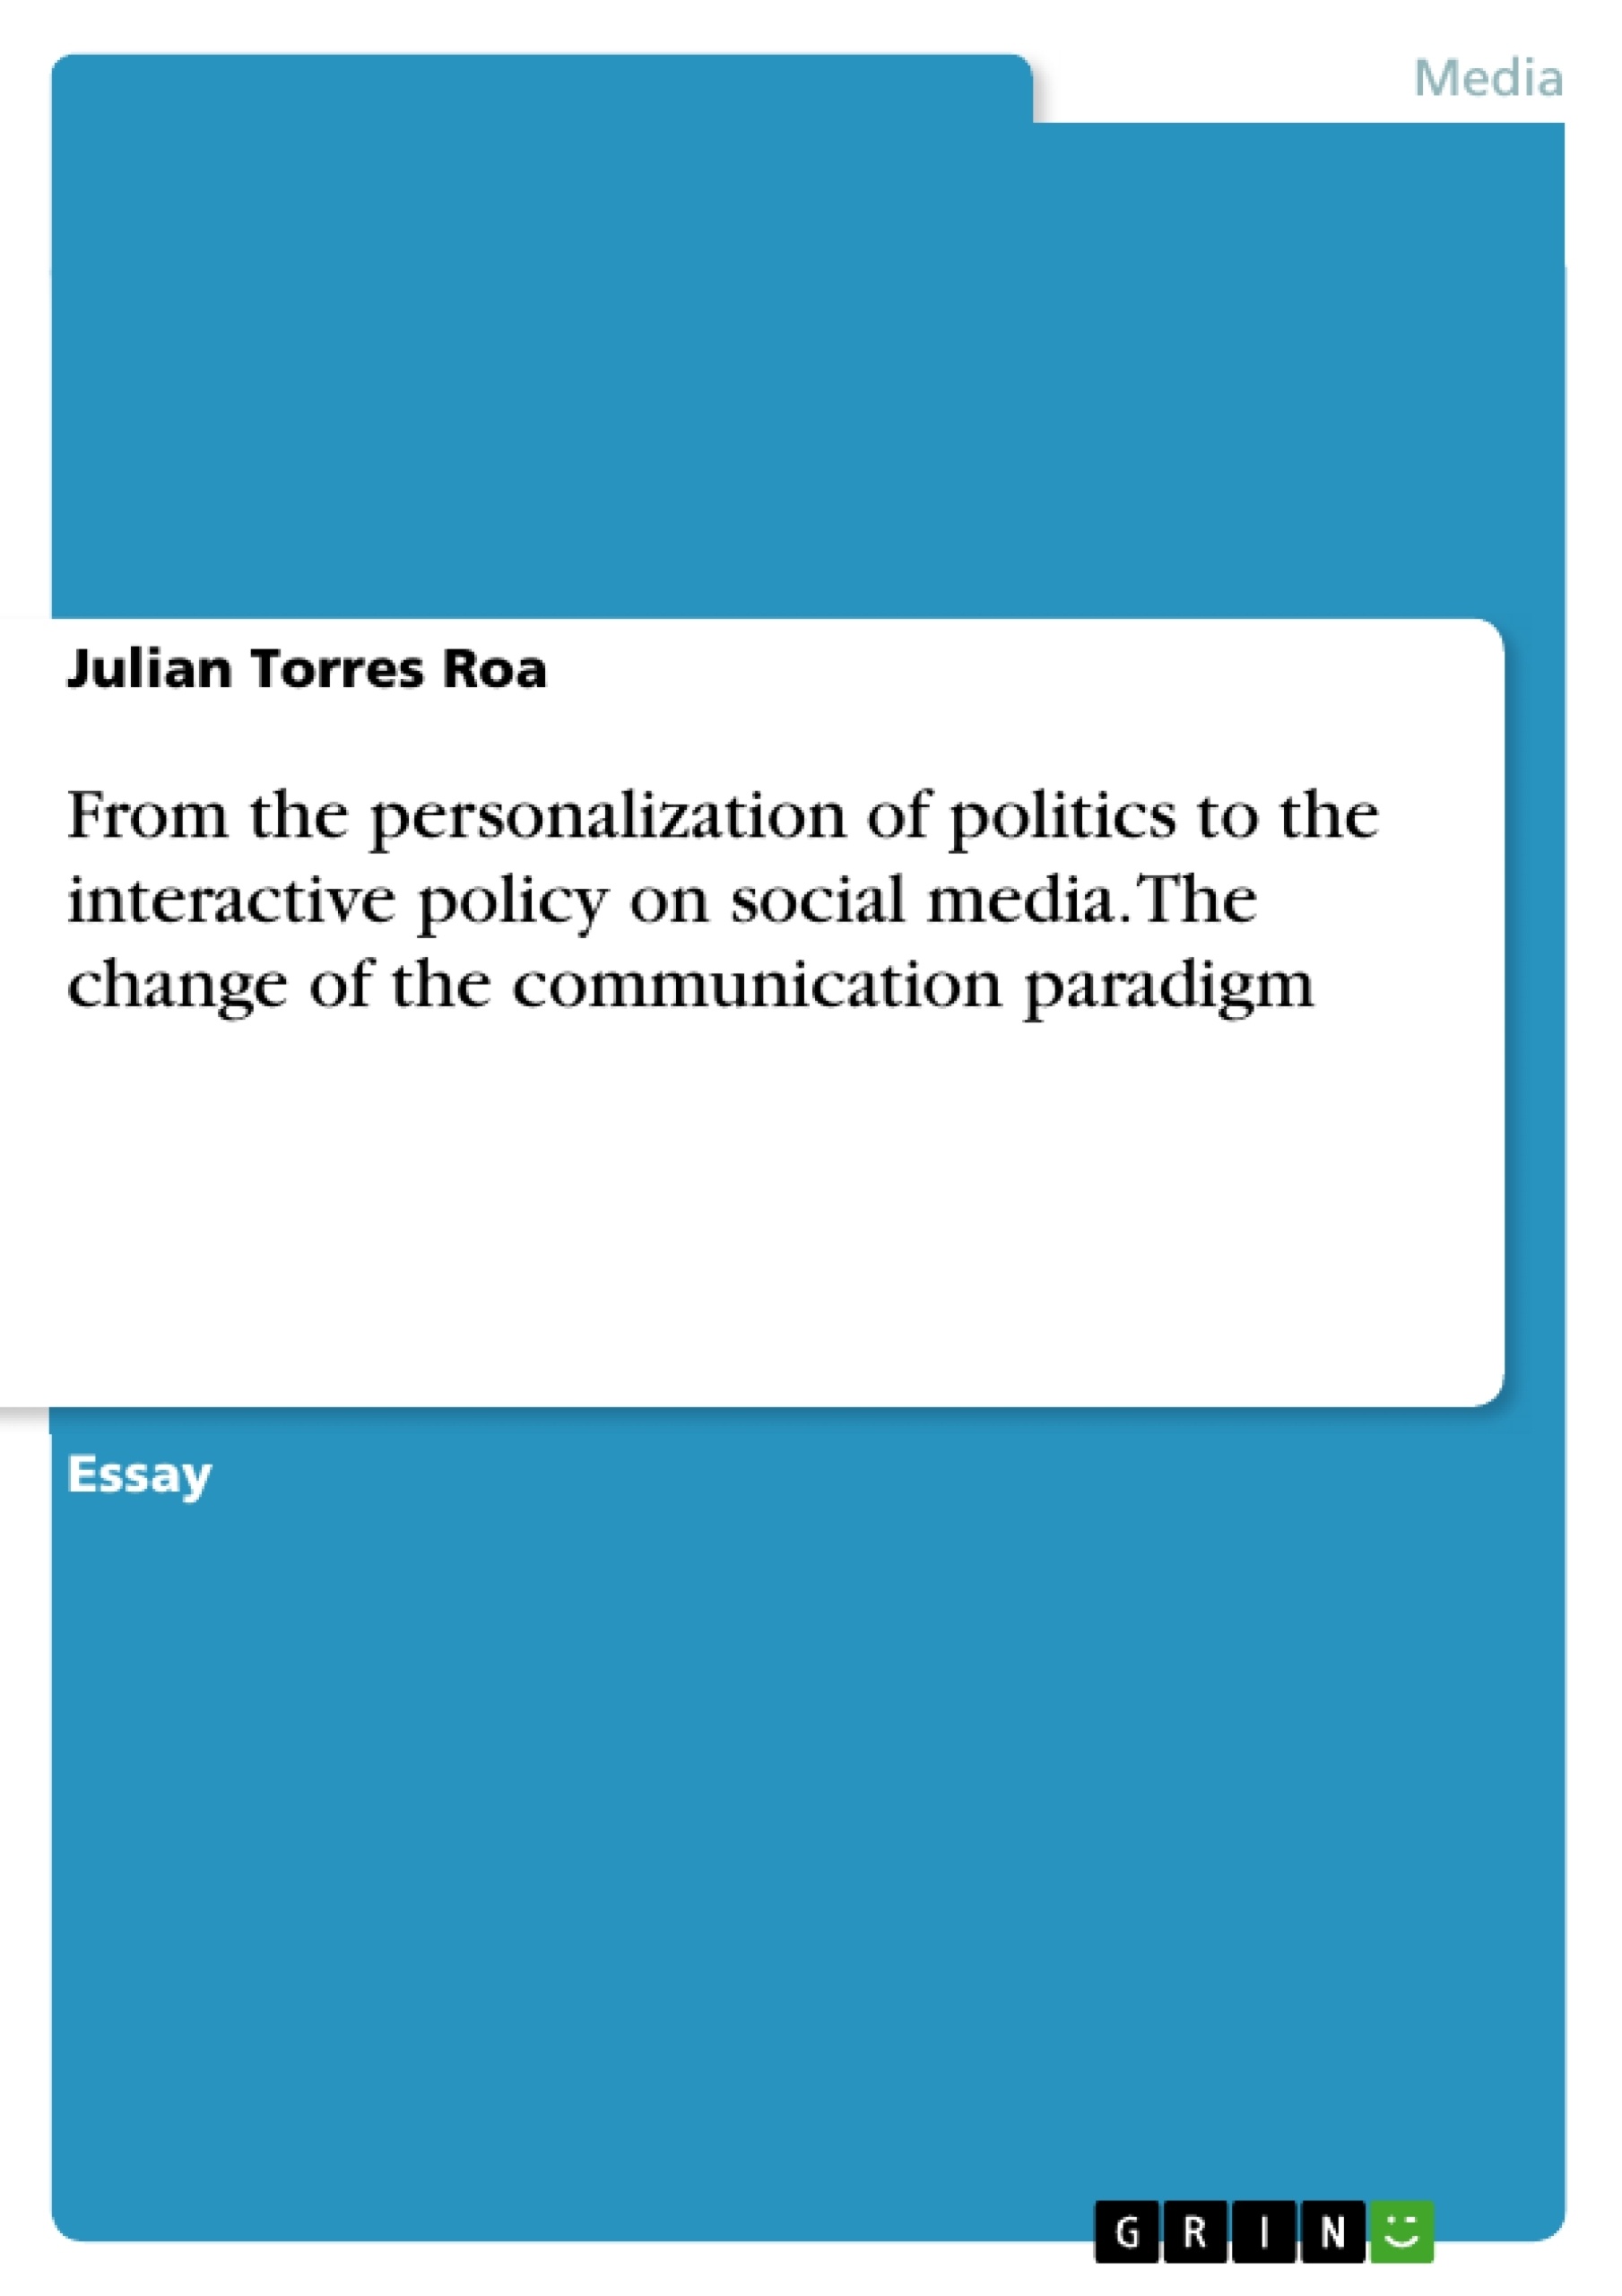 Titre: From the personalization of politics to the interactive policy on social media. The change of the communication paradigm